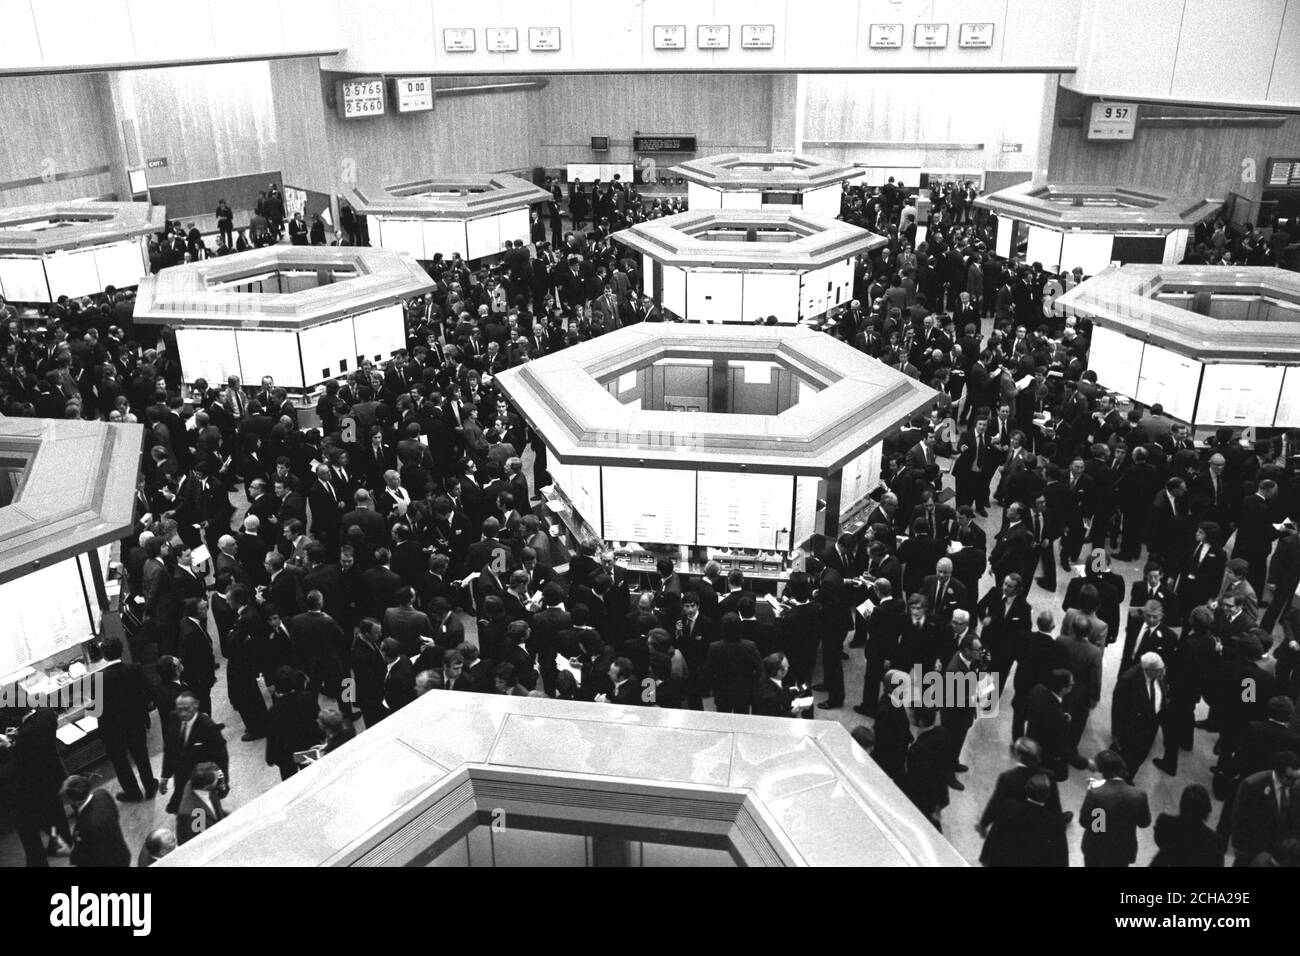 The new Stock Exchange market floor shortly after opening today. The final stage of a seven-year building programme costing £15m, it is marginally smaller than the previous one and has 16 hexagonal pitches for jobbers and price boards. Stock Photo